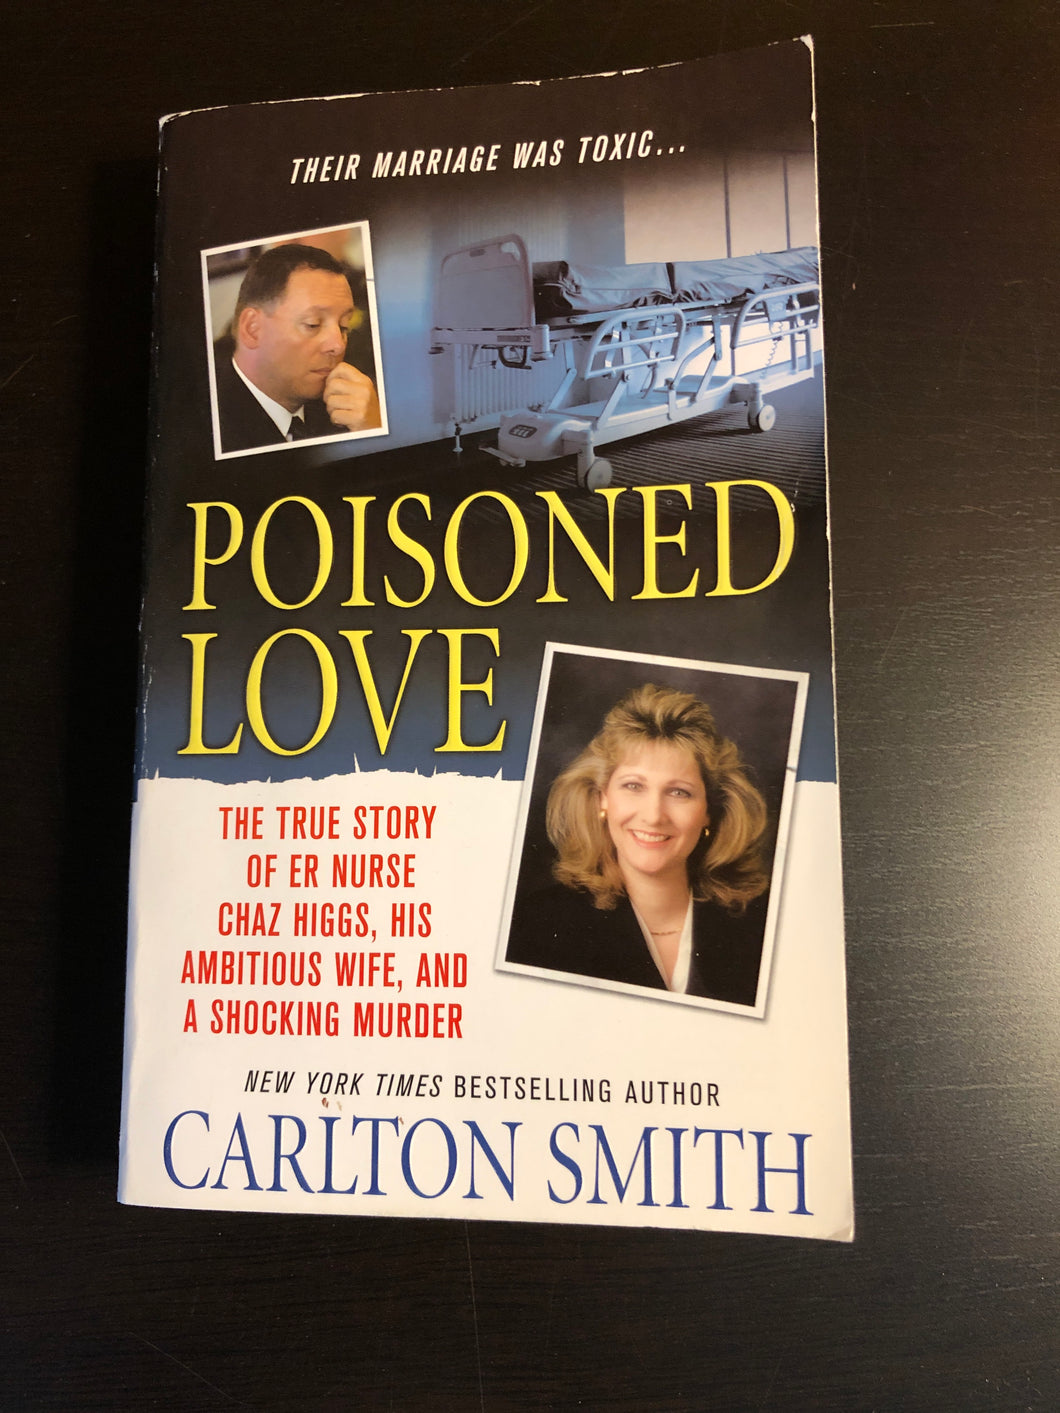 Poisoned Love: The True Story of ER Nurse Chaz Higgs, His Ambitious Wife, and a Shocking Murder